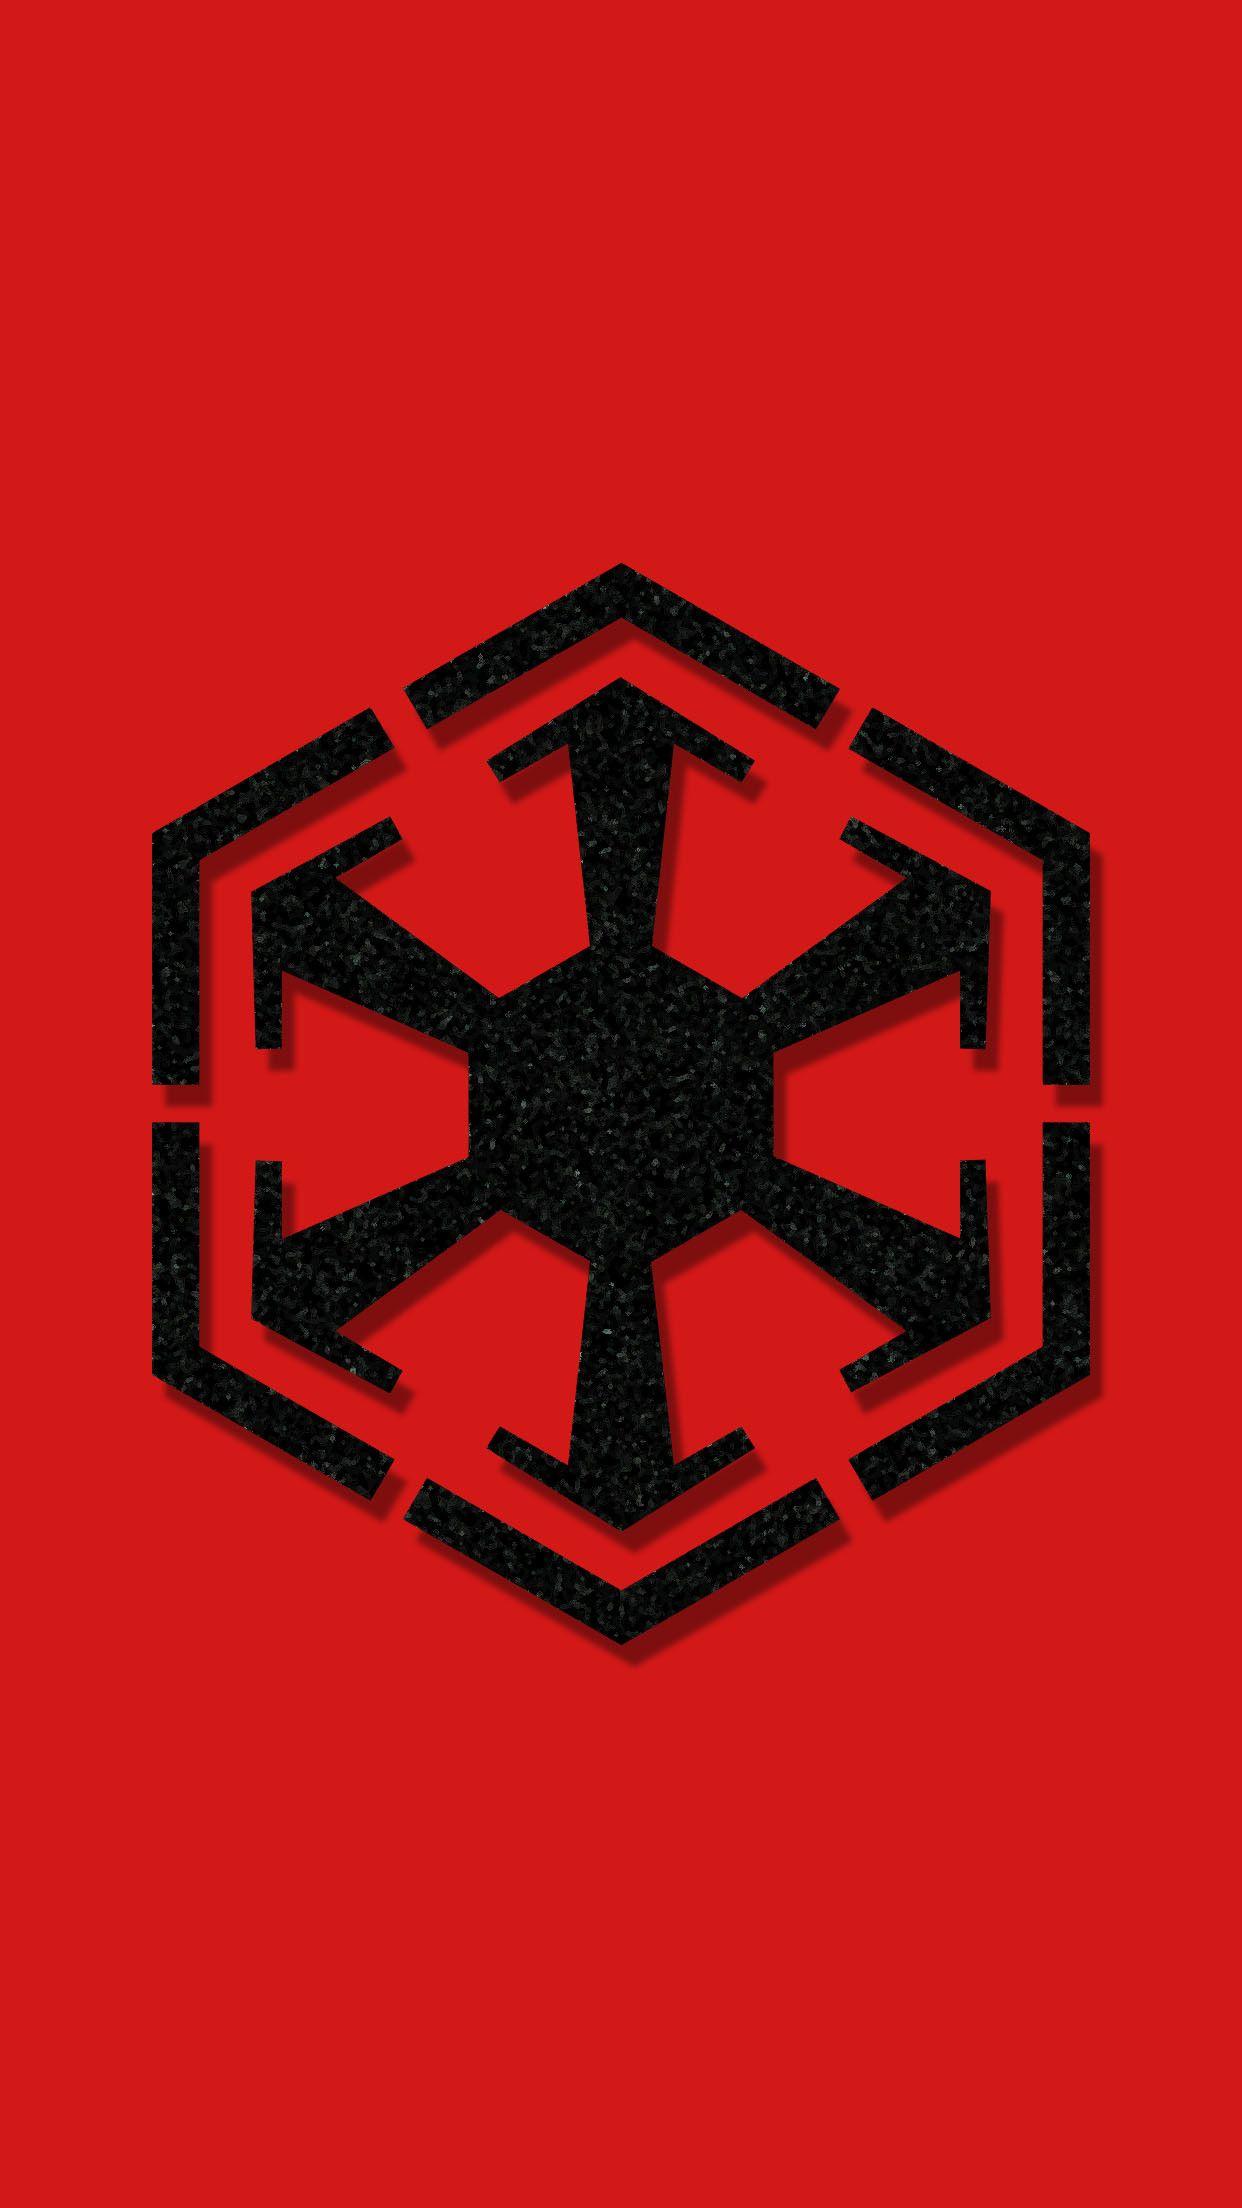 Sith Logo - 75+ Sith Symbol Wallpapers on WallpaperPlay